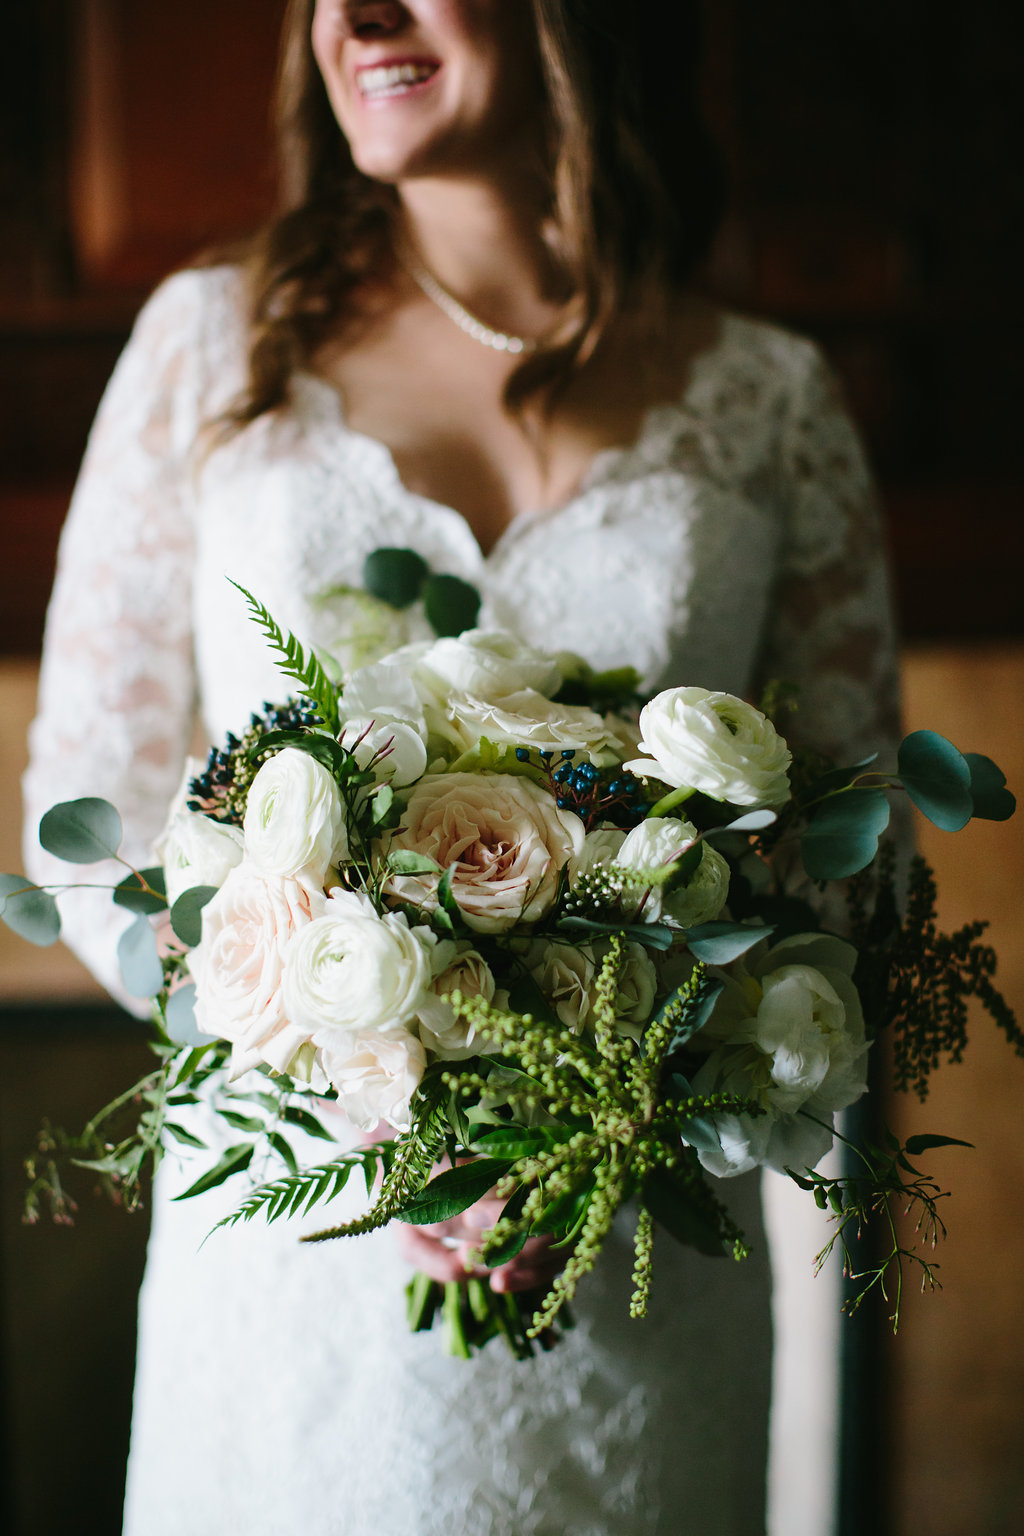 Winter wedding bride with lush bouquet of ranunculus, berries, fern, and blush garden roses.